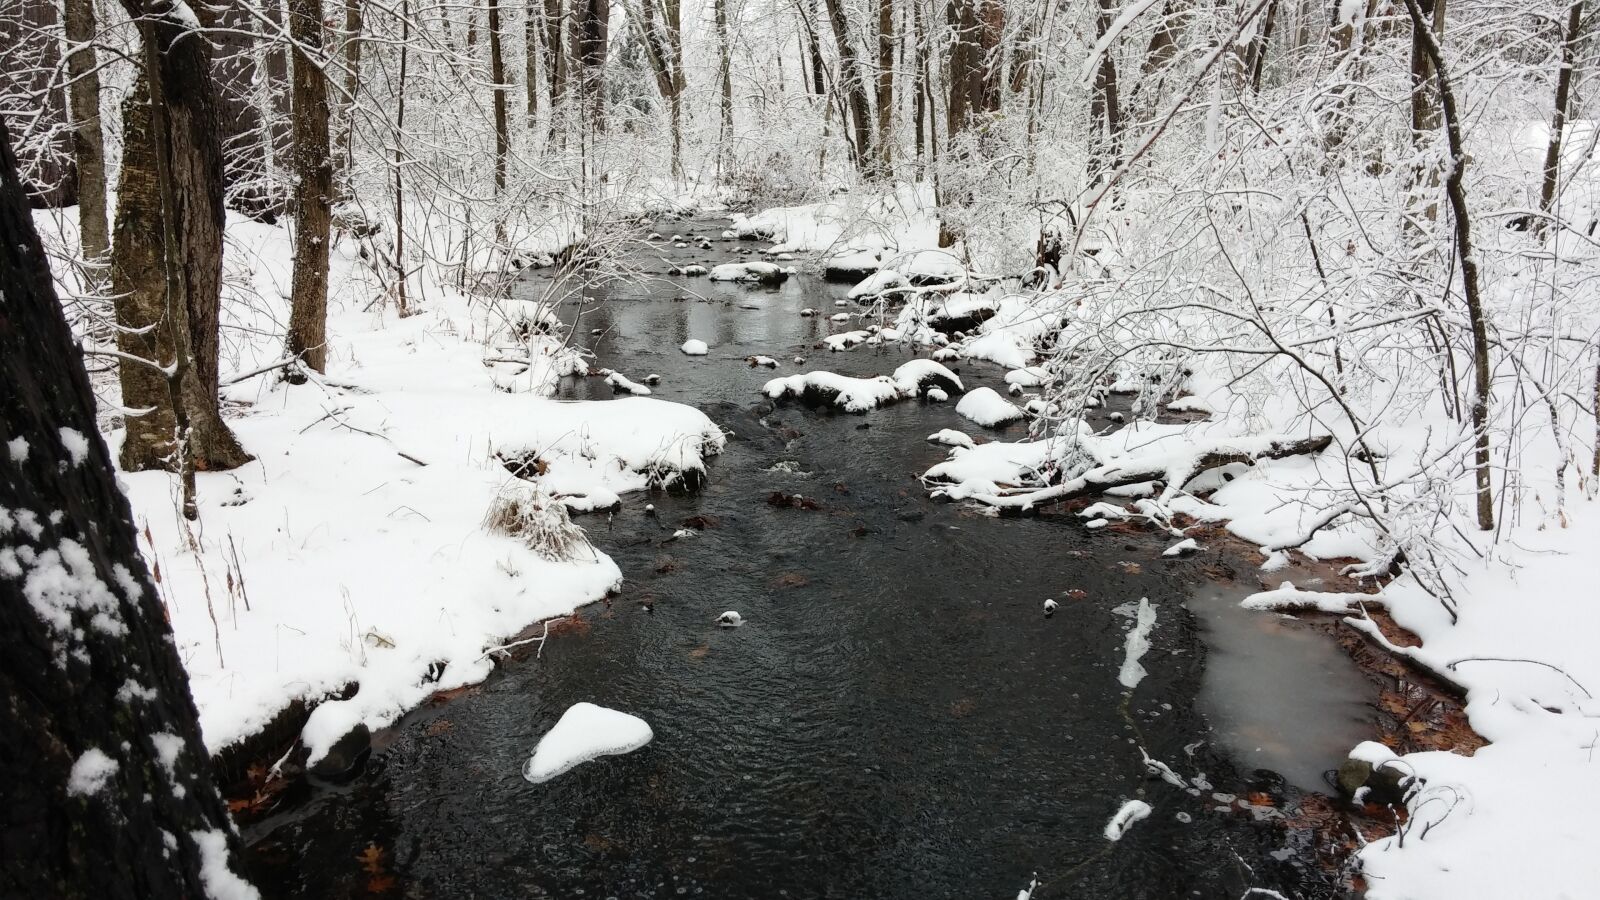 LG G2 sample photo. Stream, forest, winter photography